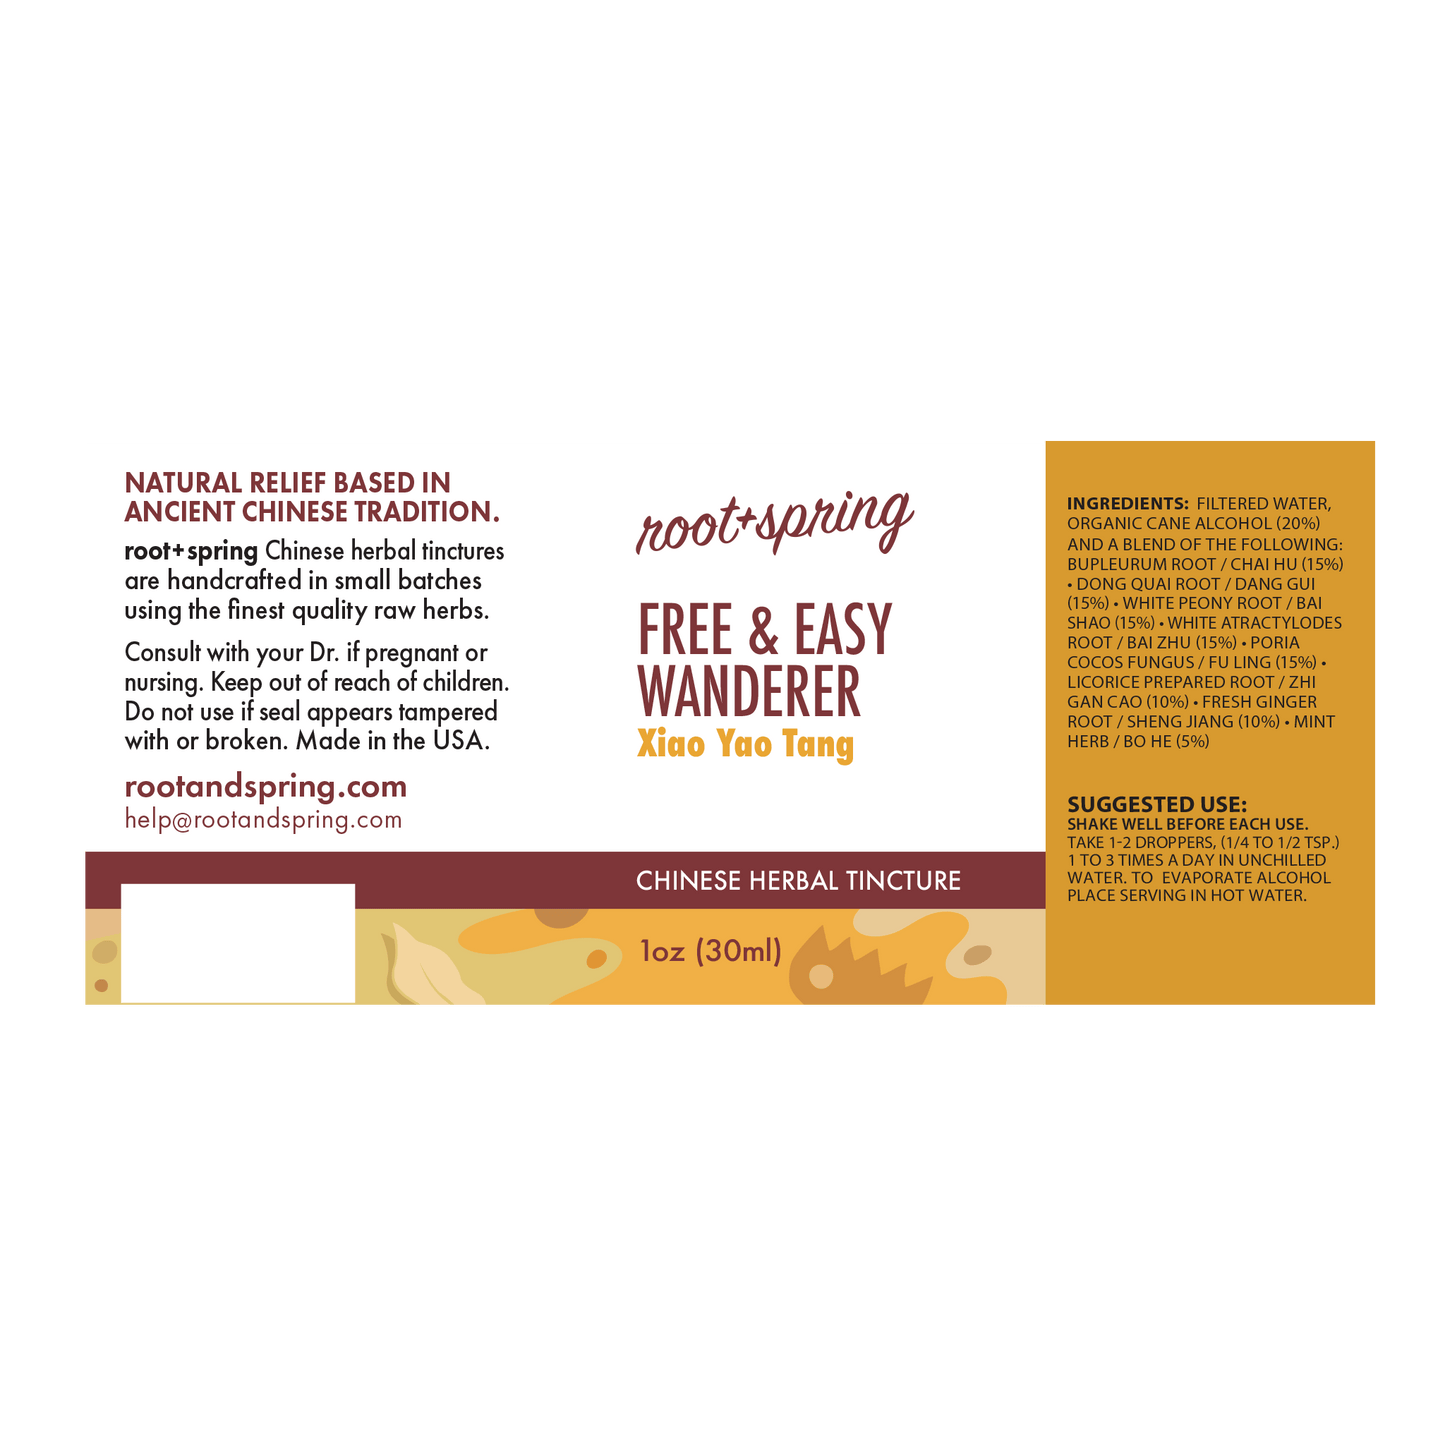 Label with Ingredients, Suggested Use, and Precautions for root + spring Free and Easy Wanderer Xiao Yao Tang Chinese herbal tincture.